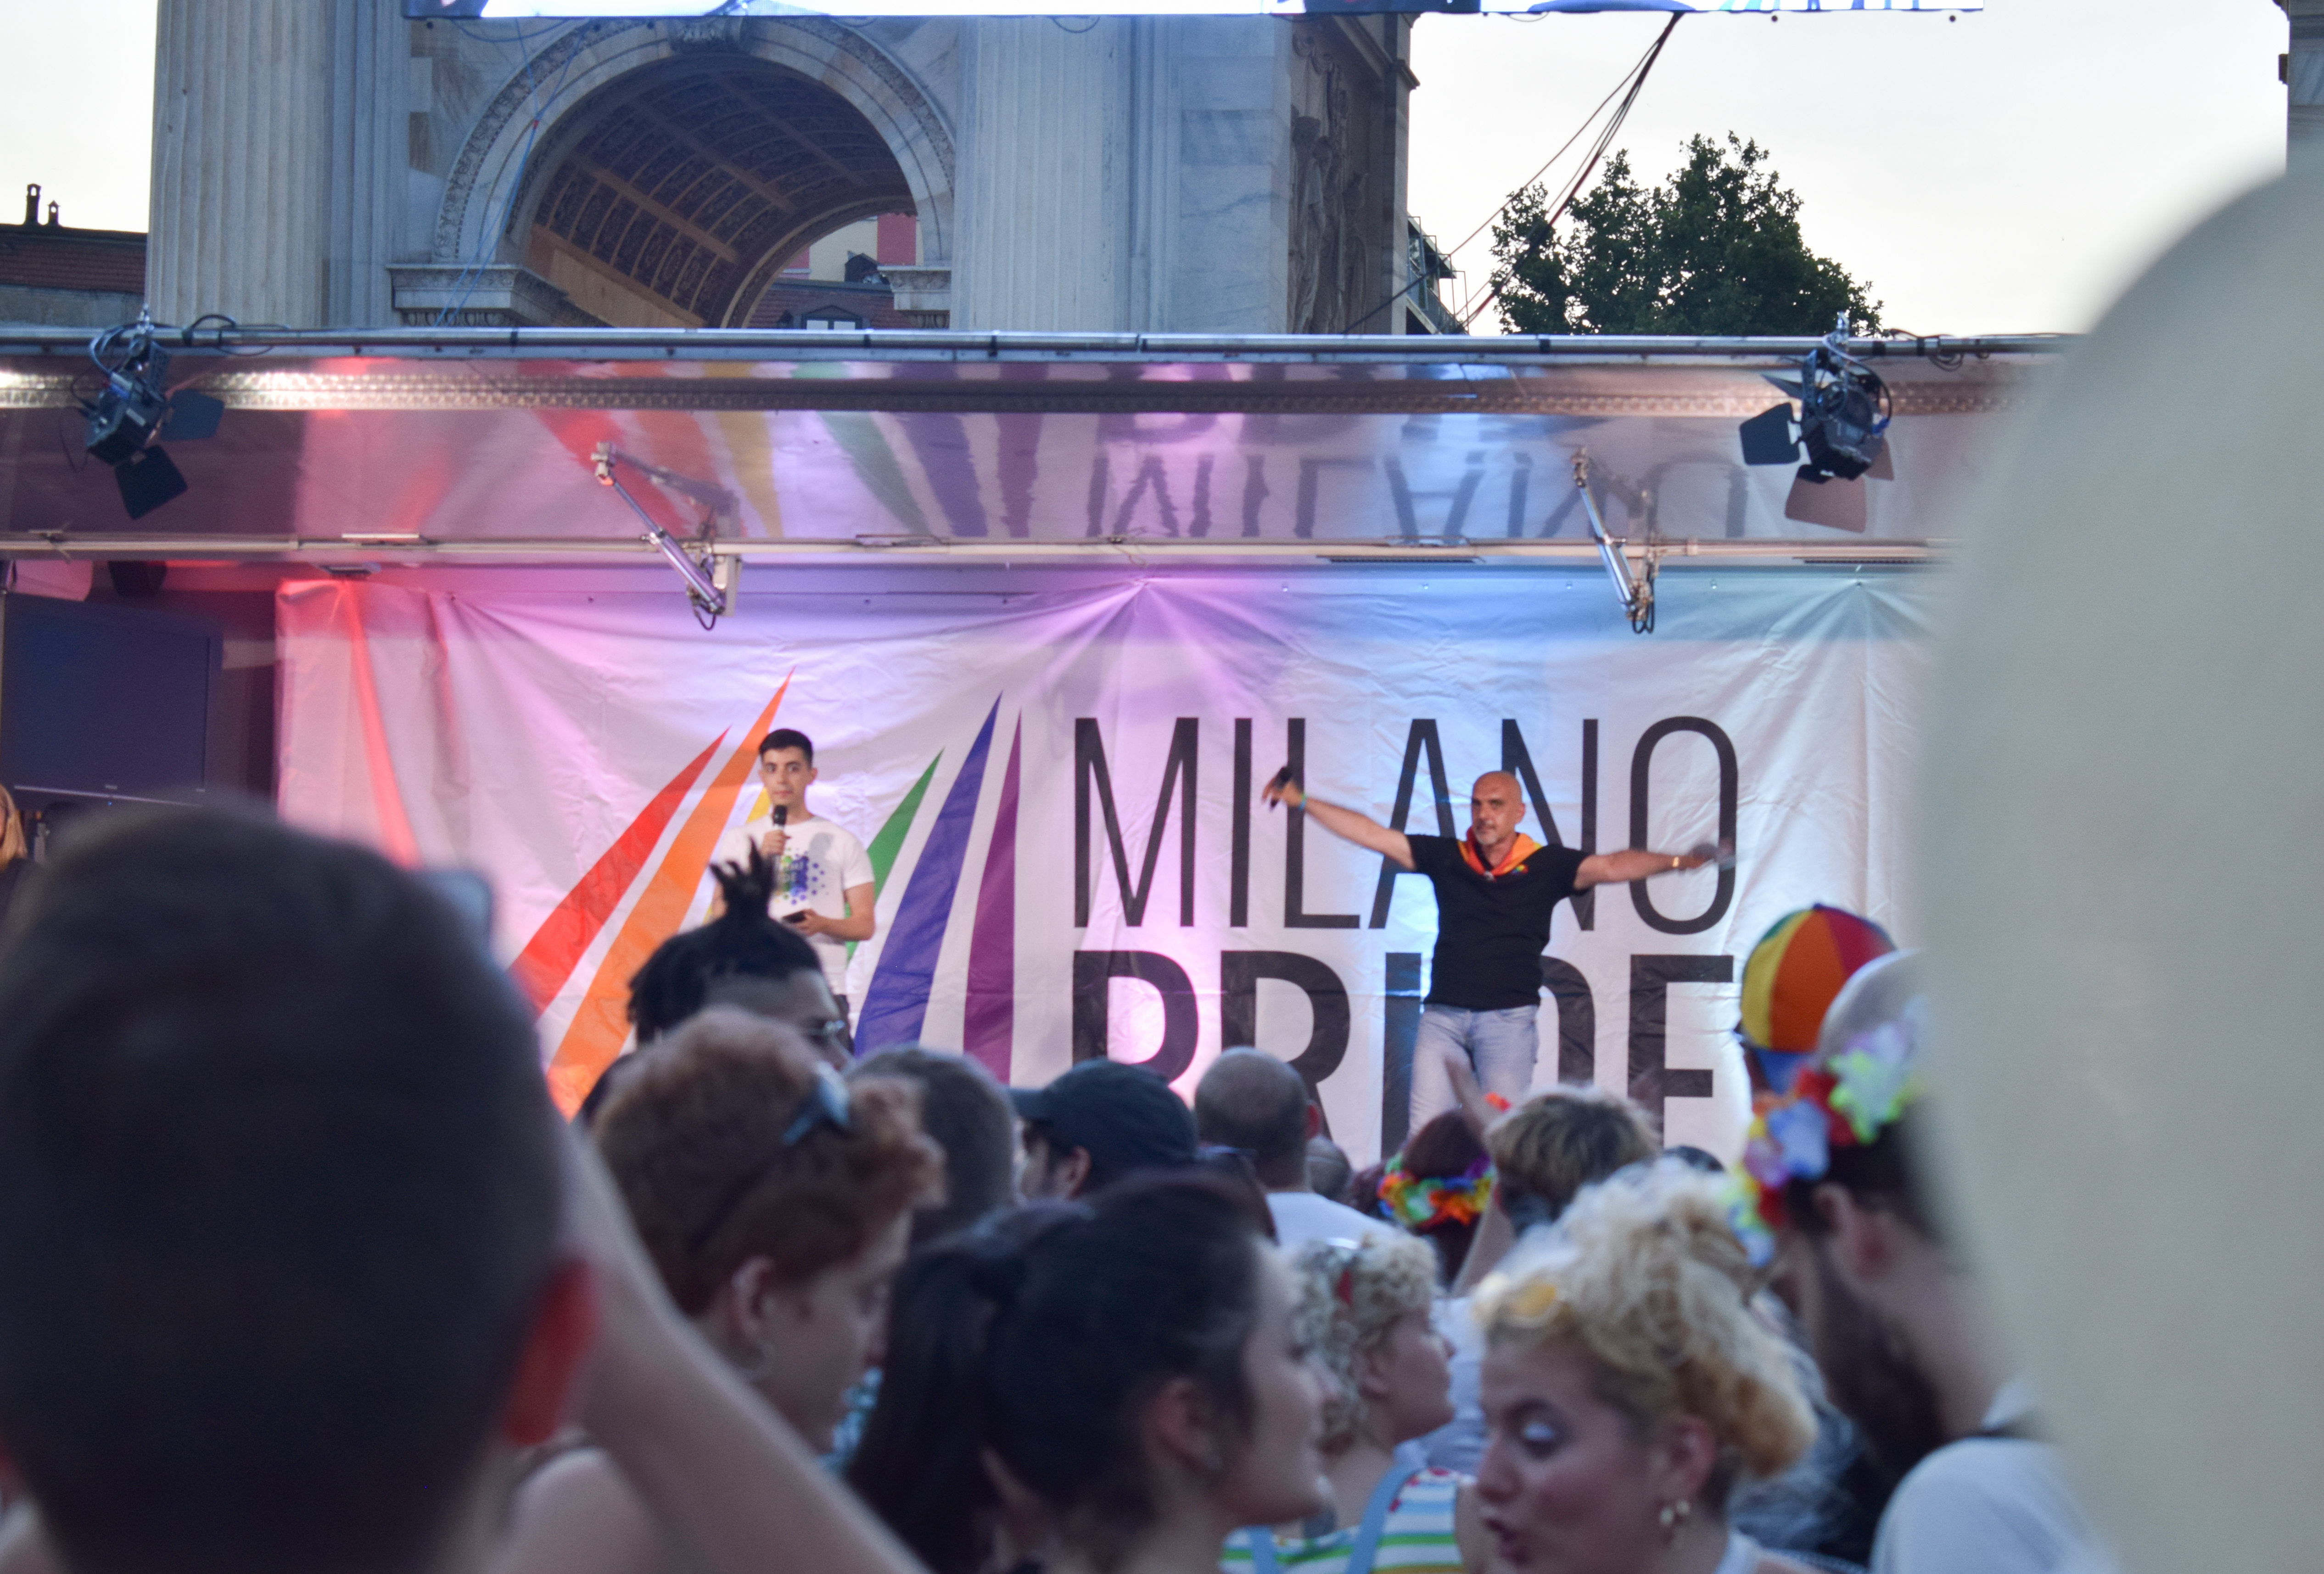 The main stage at Milano Pride 2021